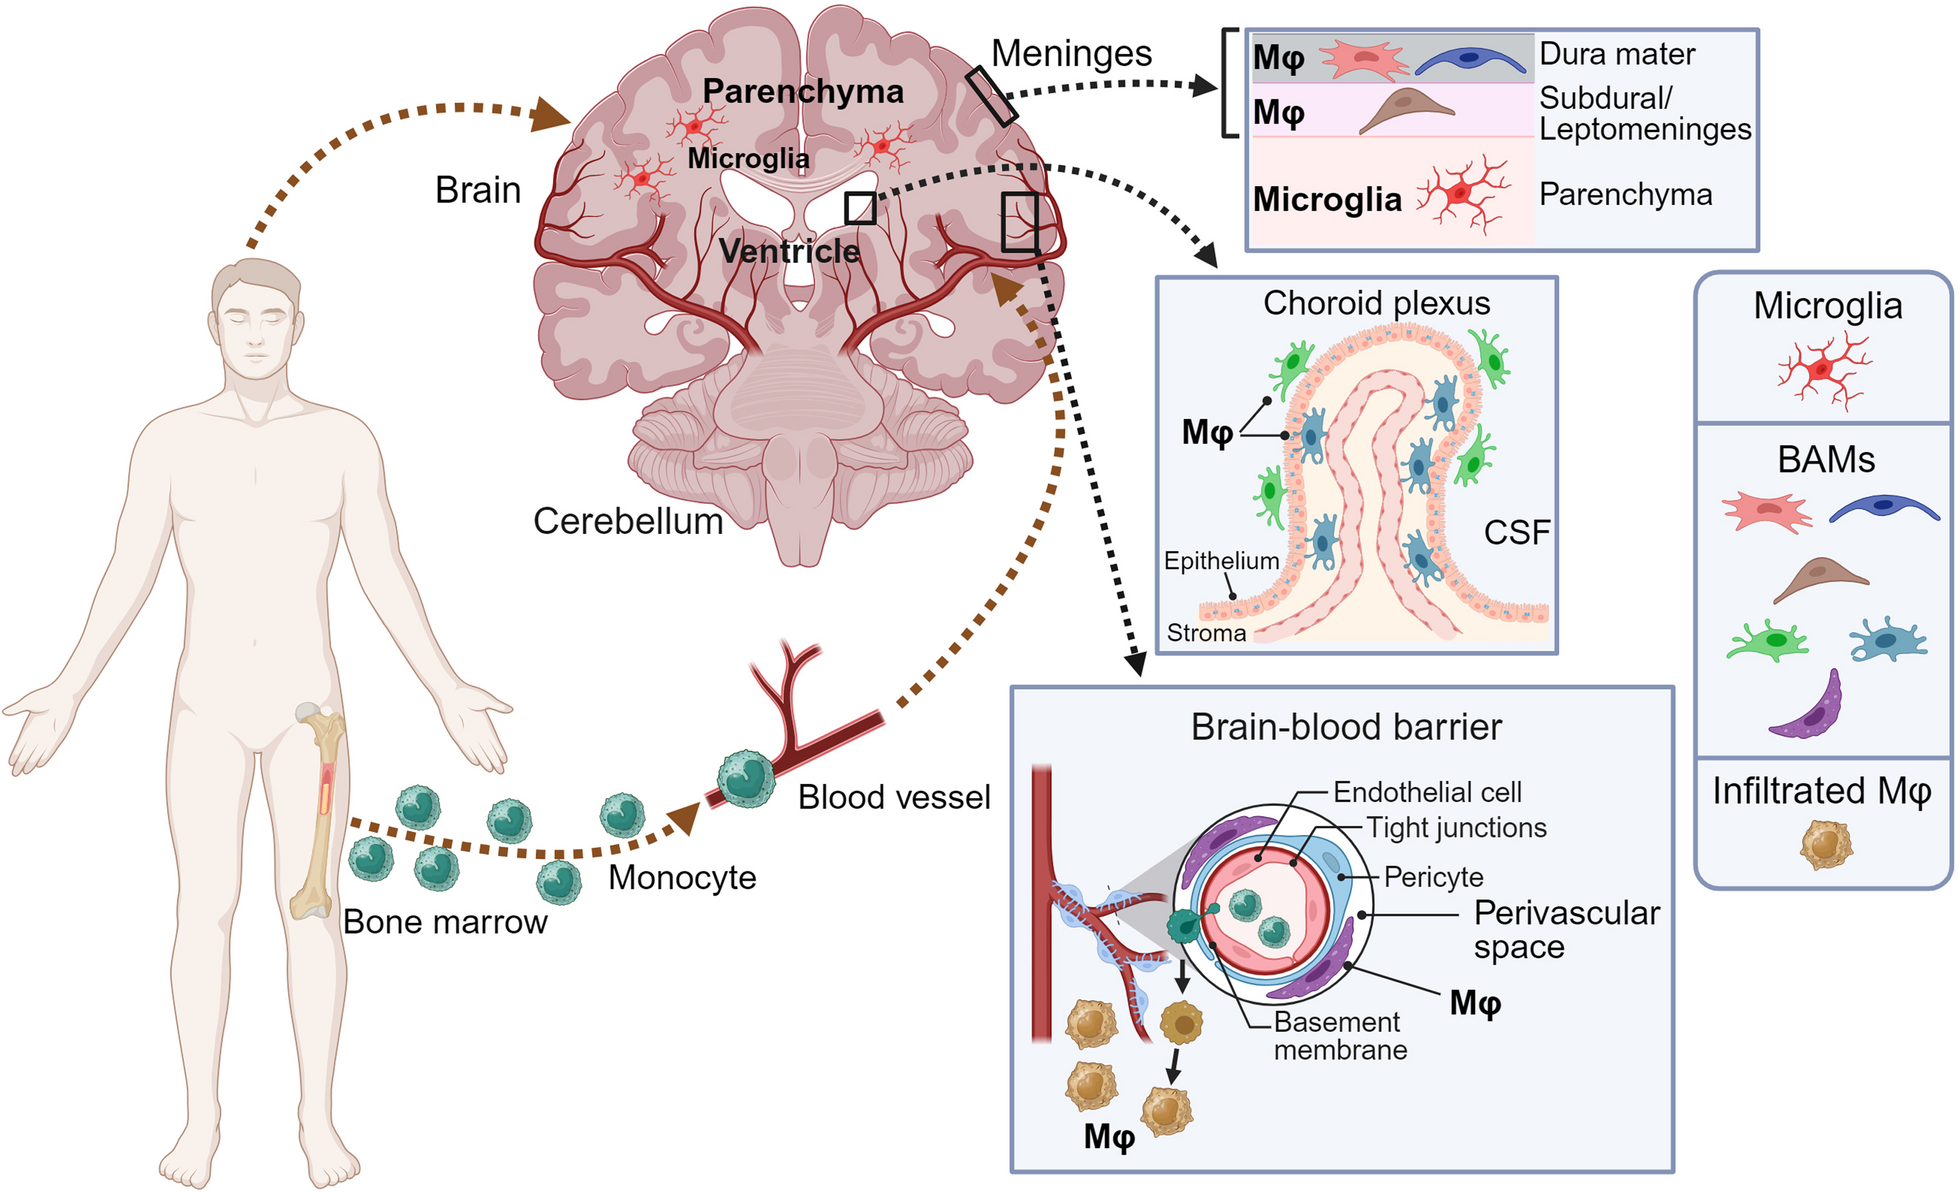 Border-associated macrophages in the central nervous system